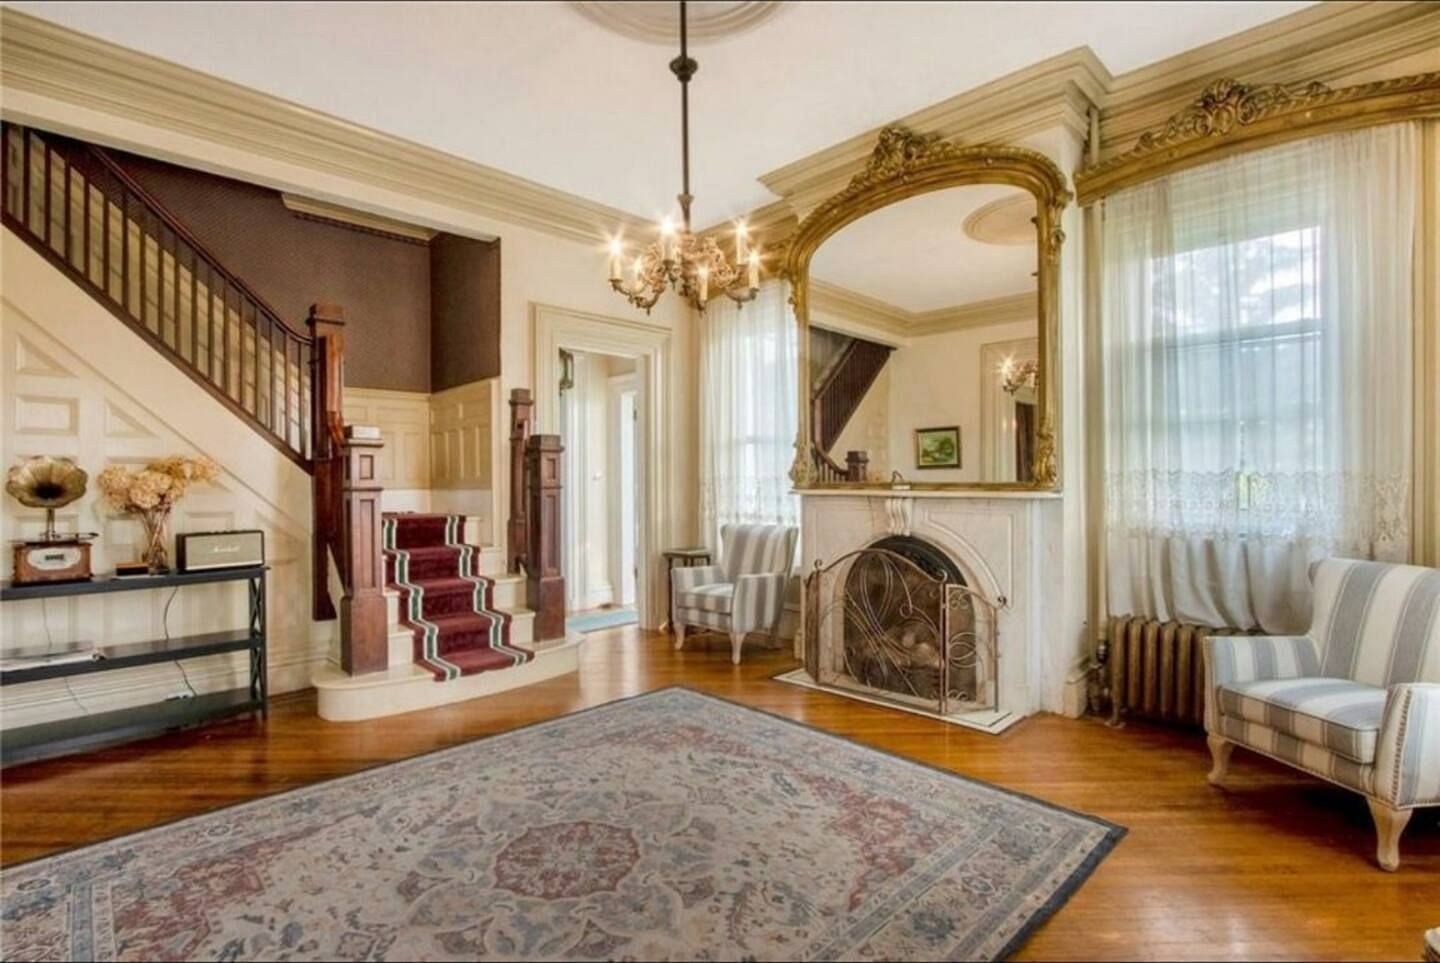 JWguest House at Chester, New York | Victorian Style Historic Home |  14 pax #1 | Jwbnb no brobnb 4